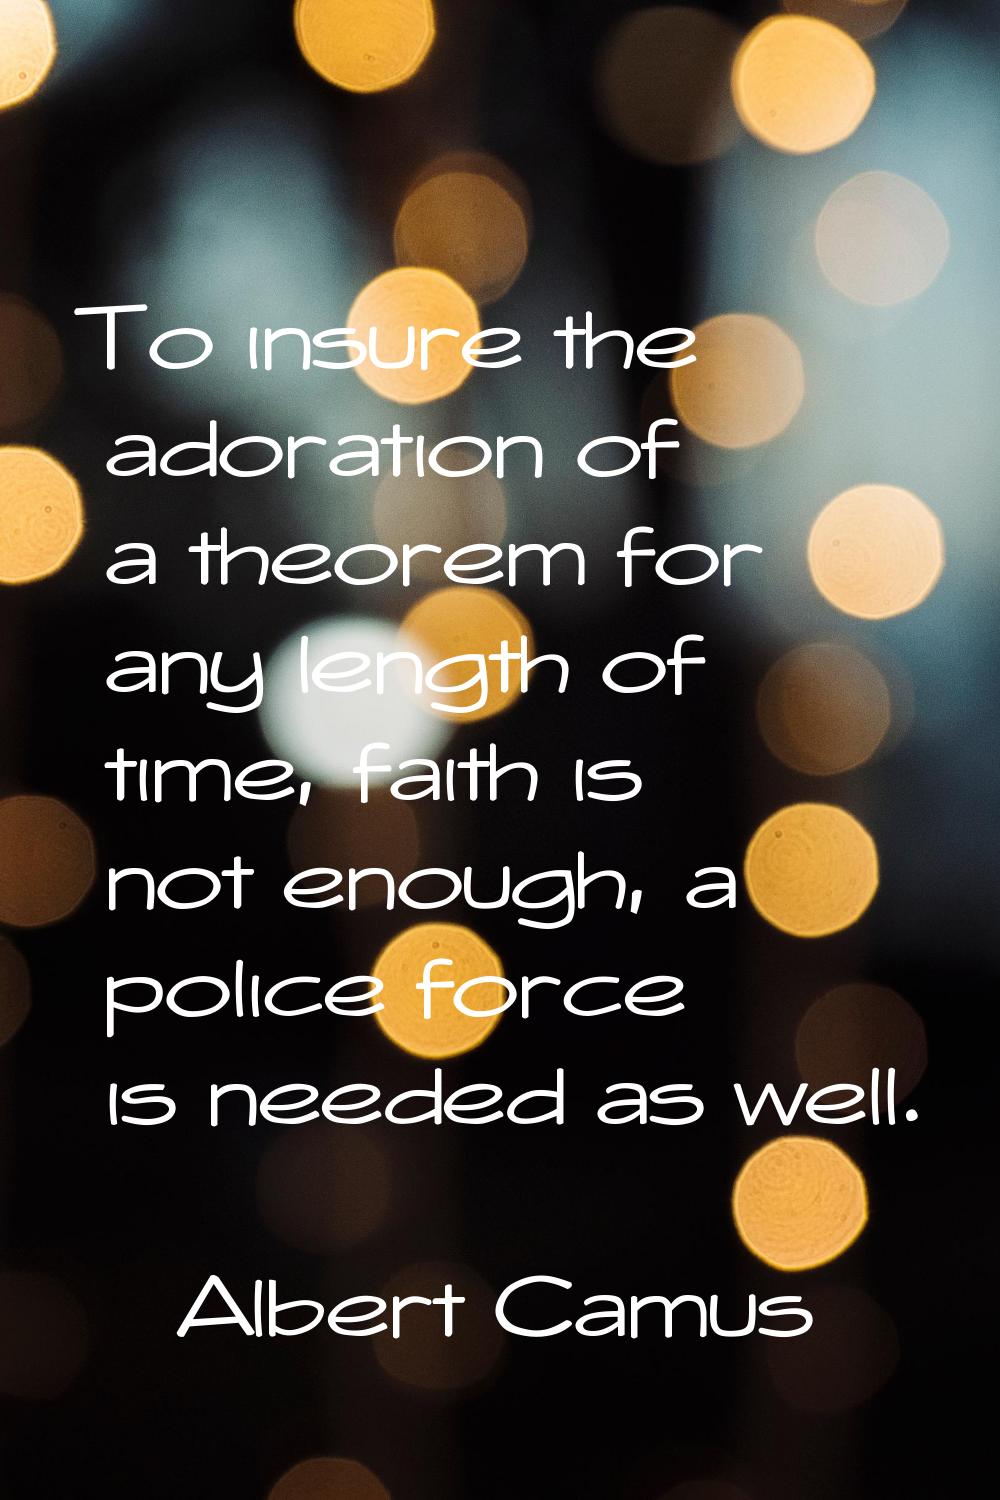 To insure the adoration of a theorem for any length of time, faith is not enough, a police force is